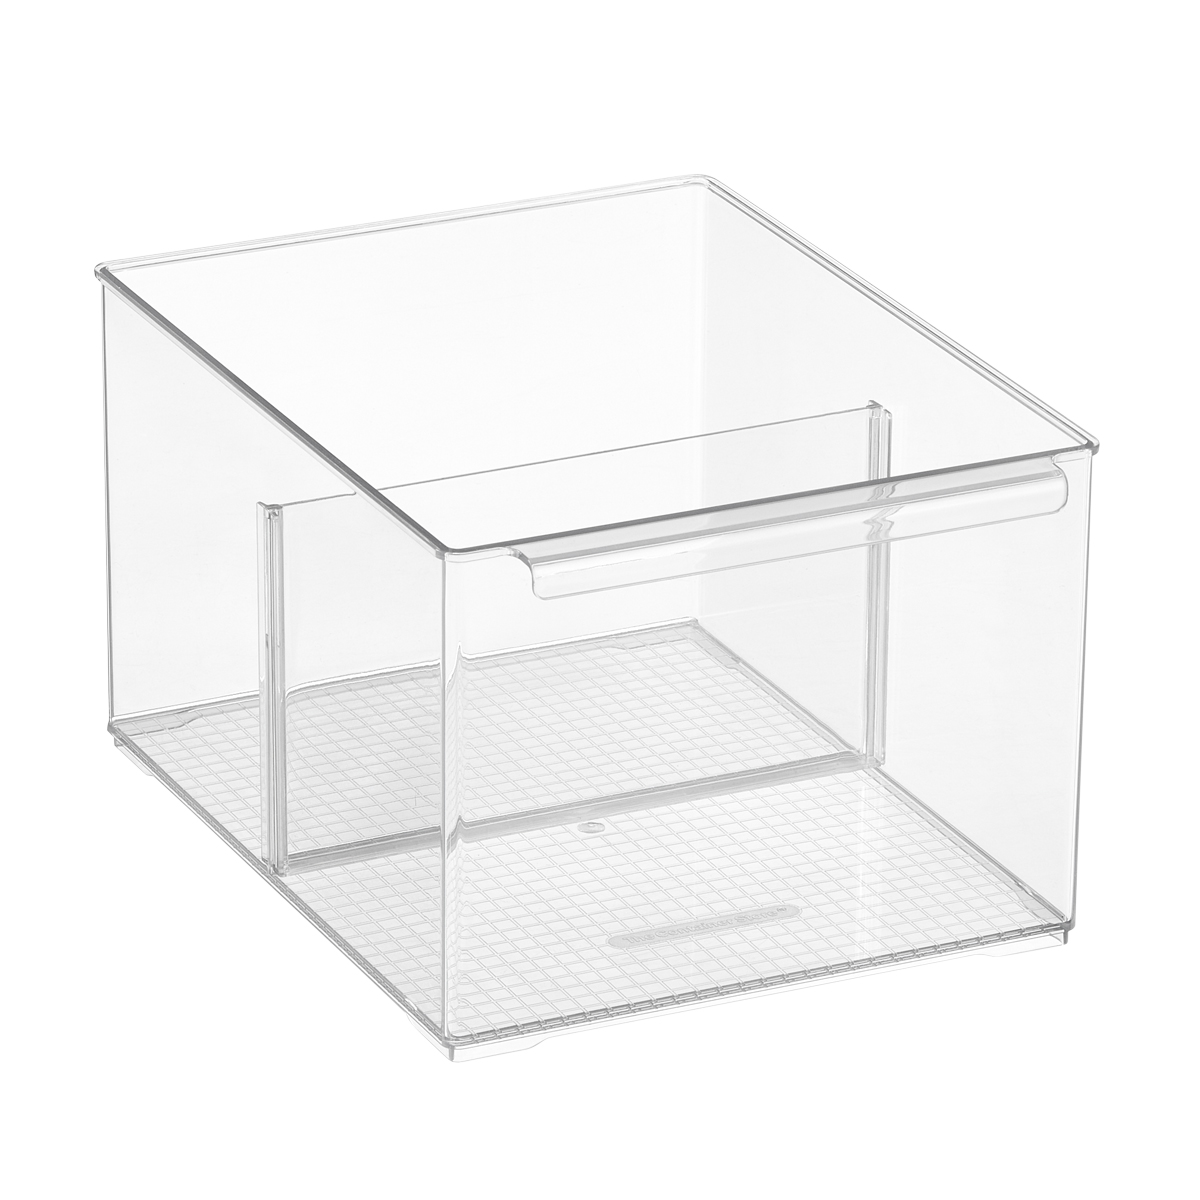 Everything Organizer Large Cabinet Depth Pantry Bin w/ Divider Clear